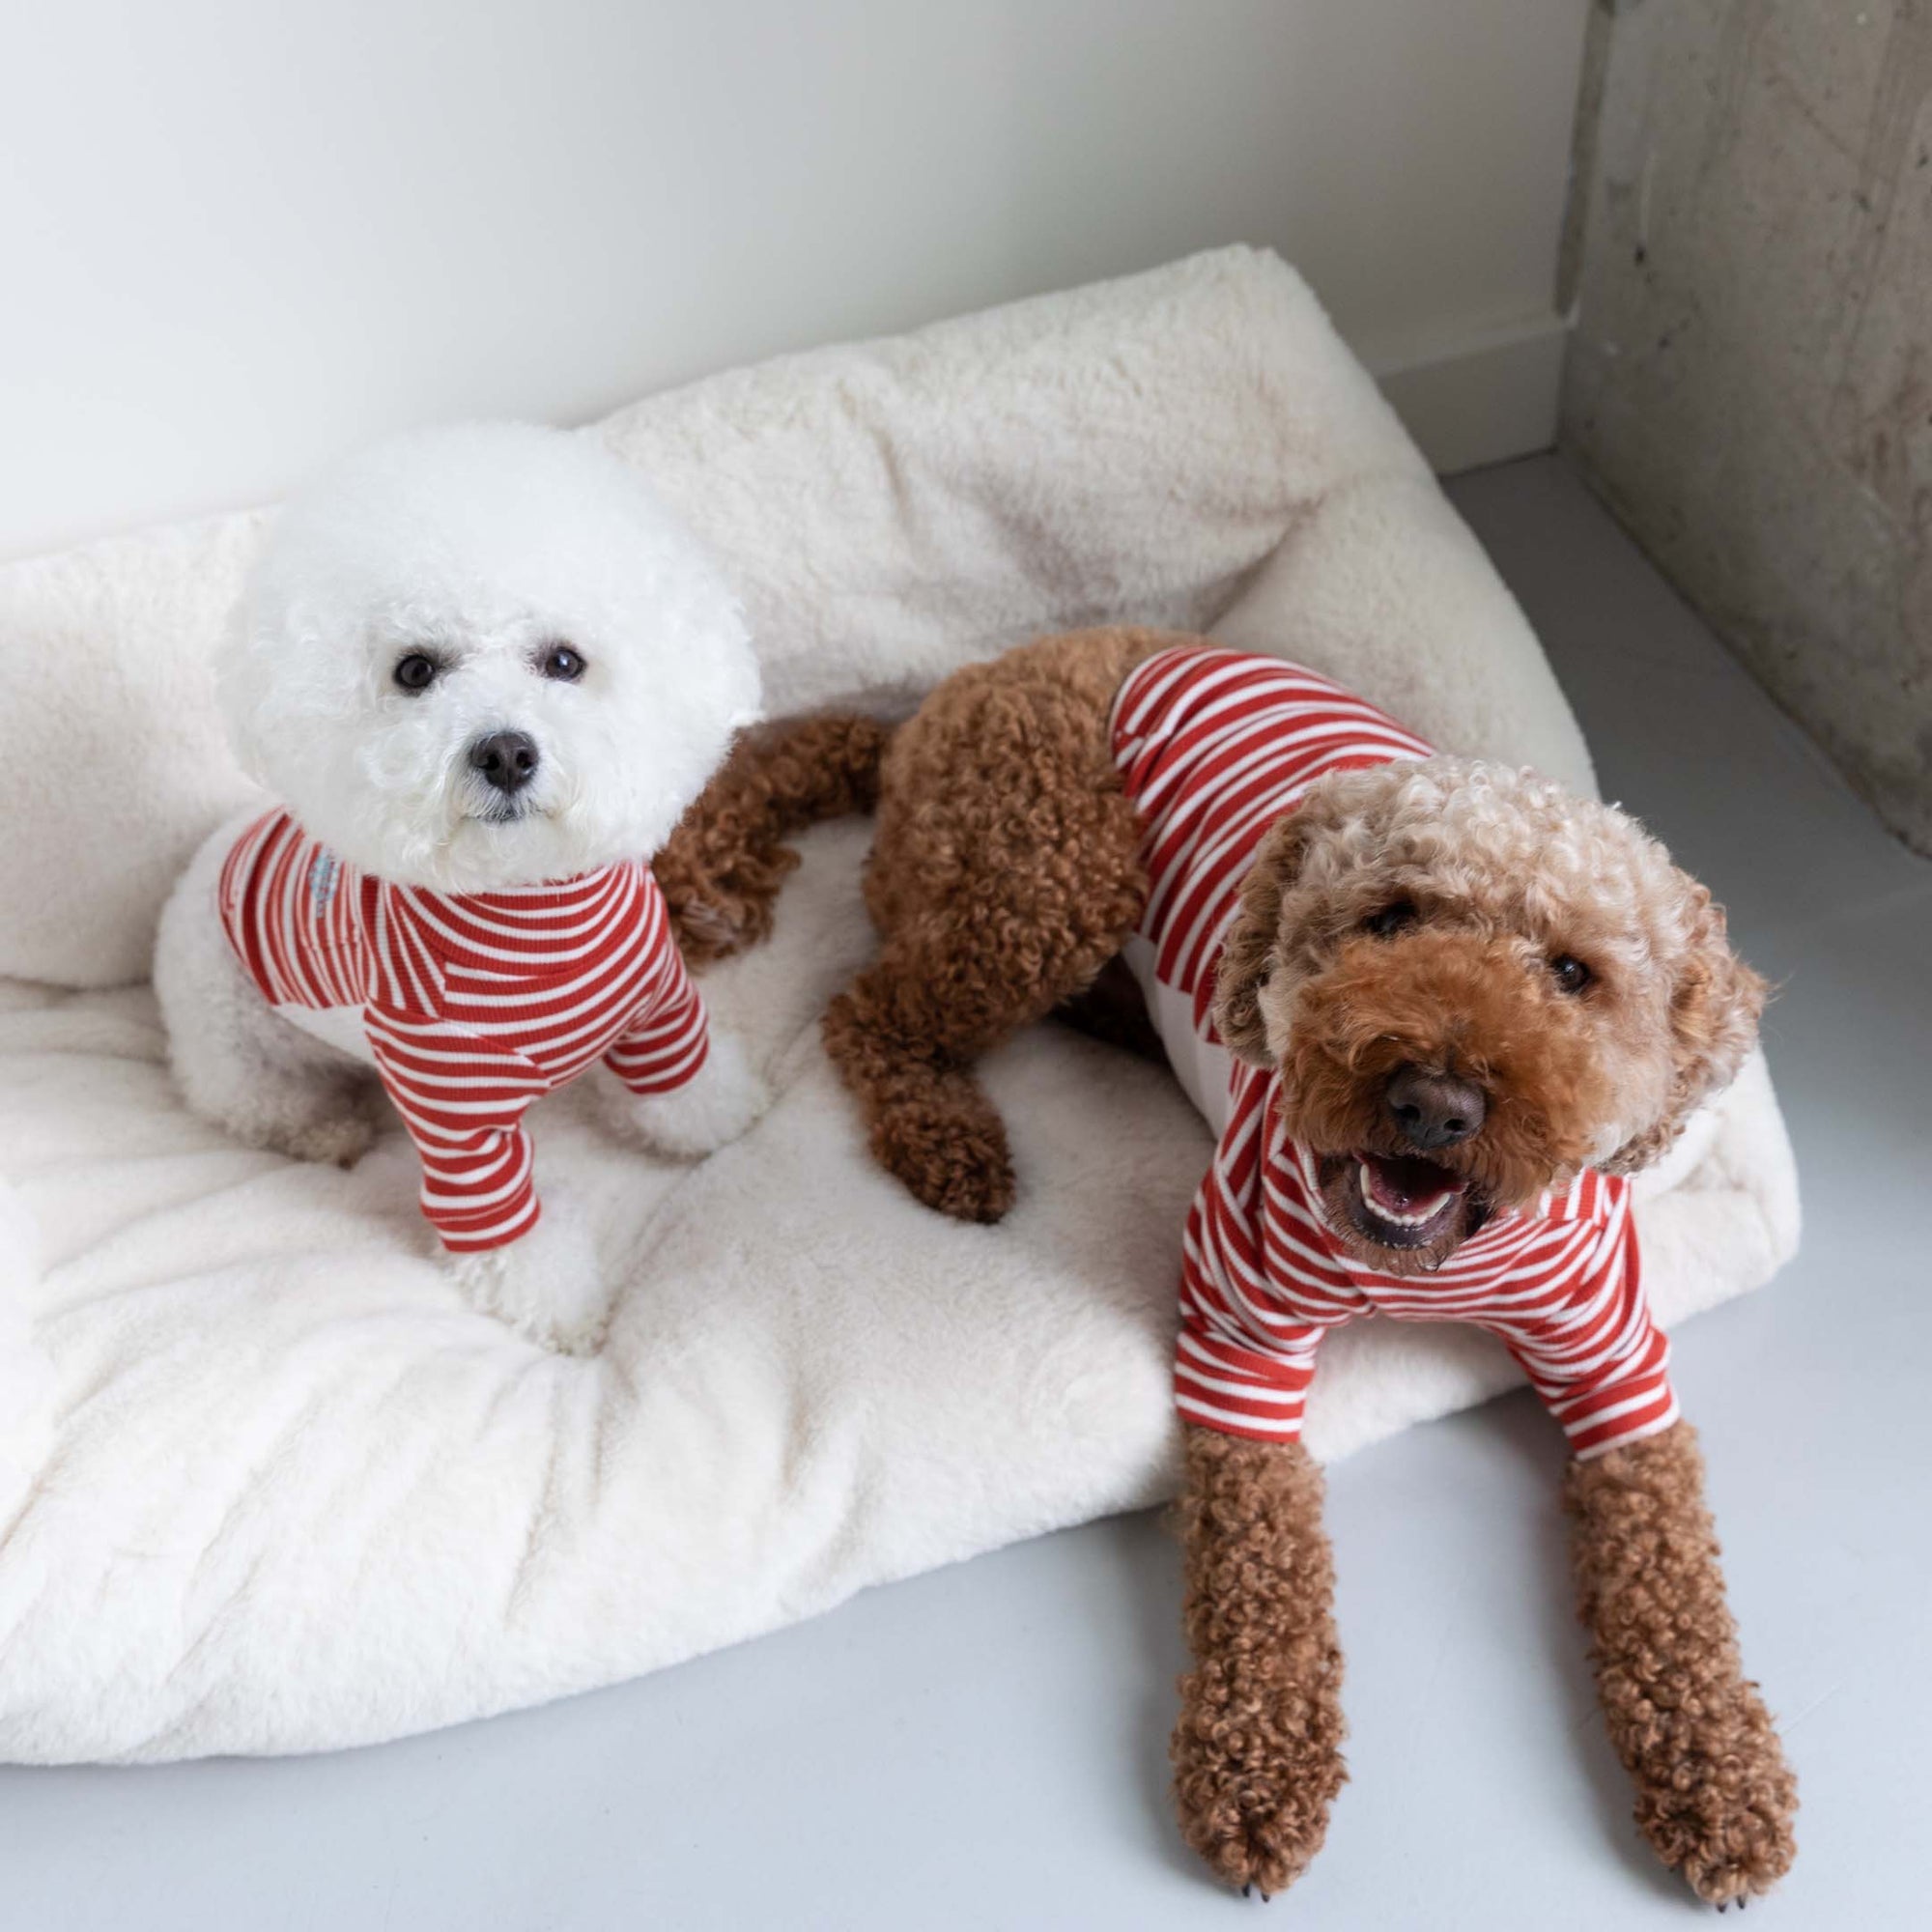 A white Bichon Frise and a brown poodle mix on a cream cushion, both wearing matching Rust & Ivory striped. The Bichon Frise looks at the camera, while the poodle mix lays sprawled with an open-mouthed smile.